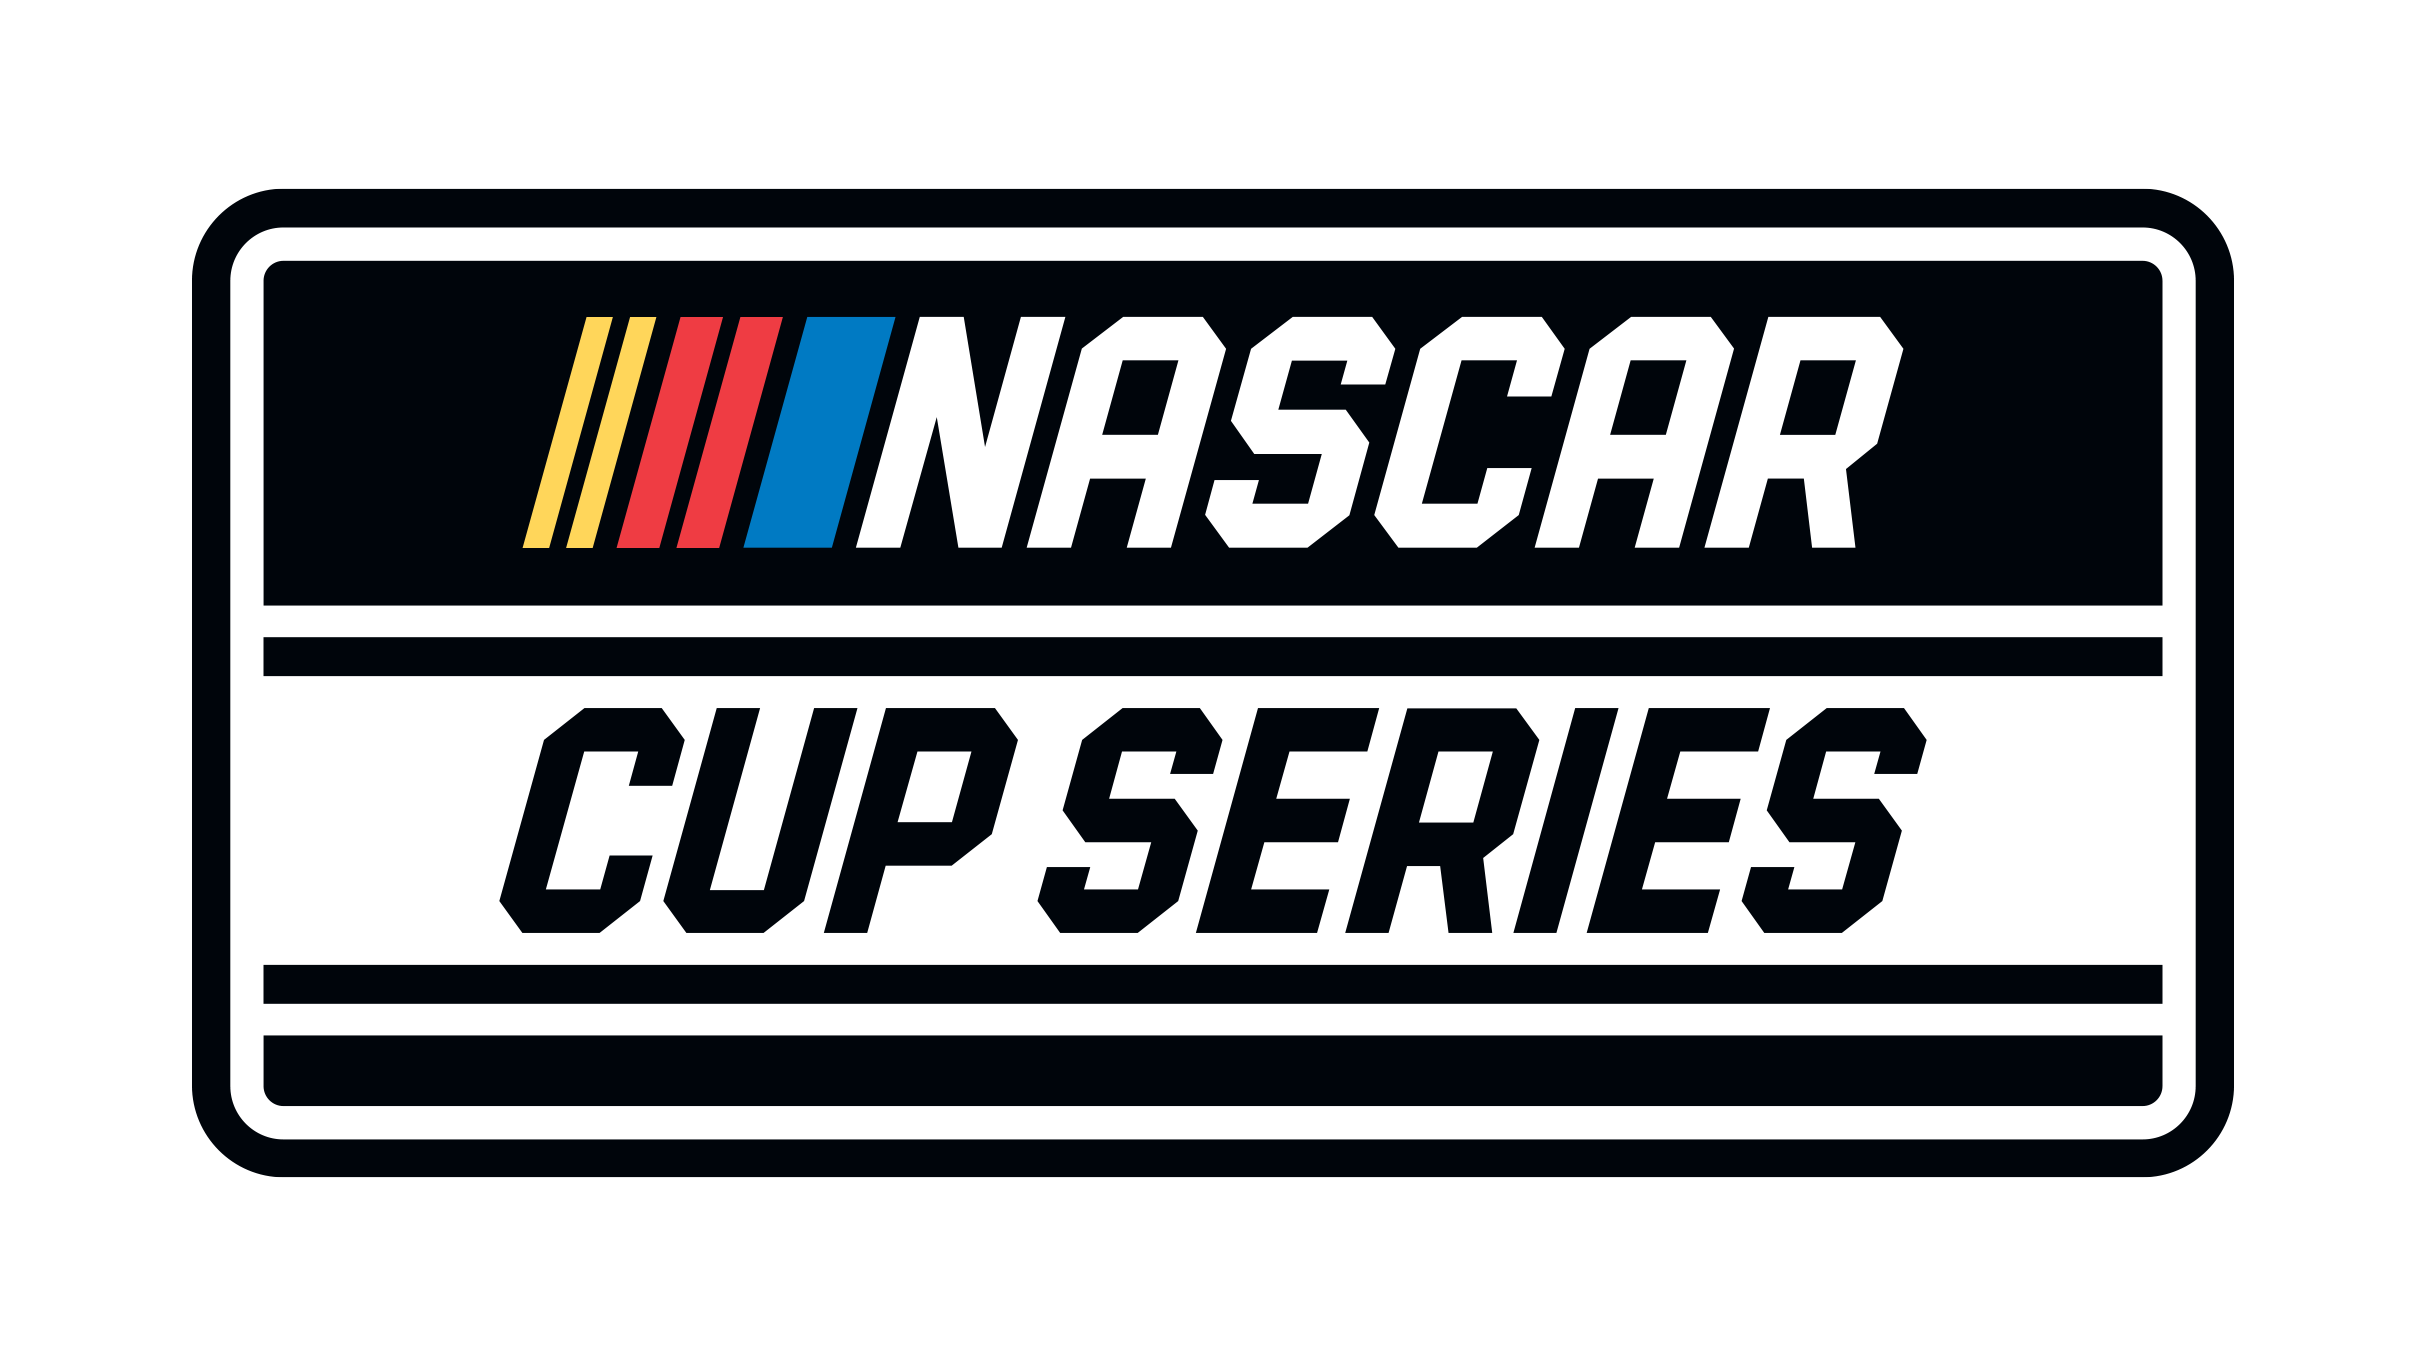 New Hampshire Motor Speedway NASCAR Cup Series